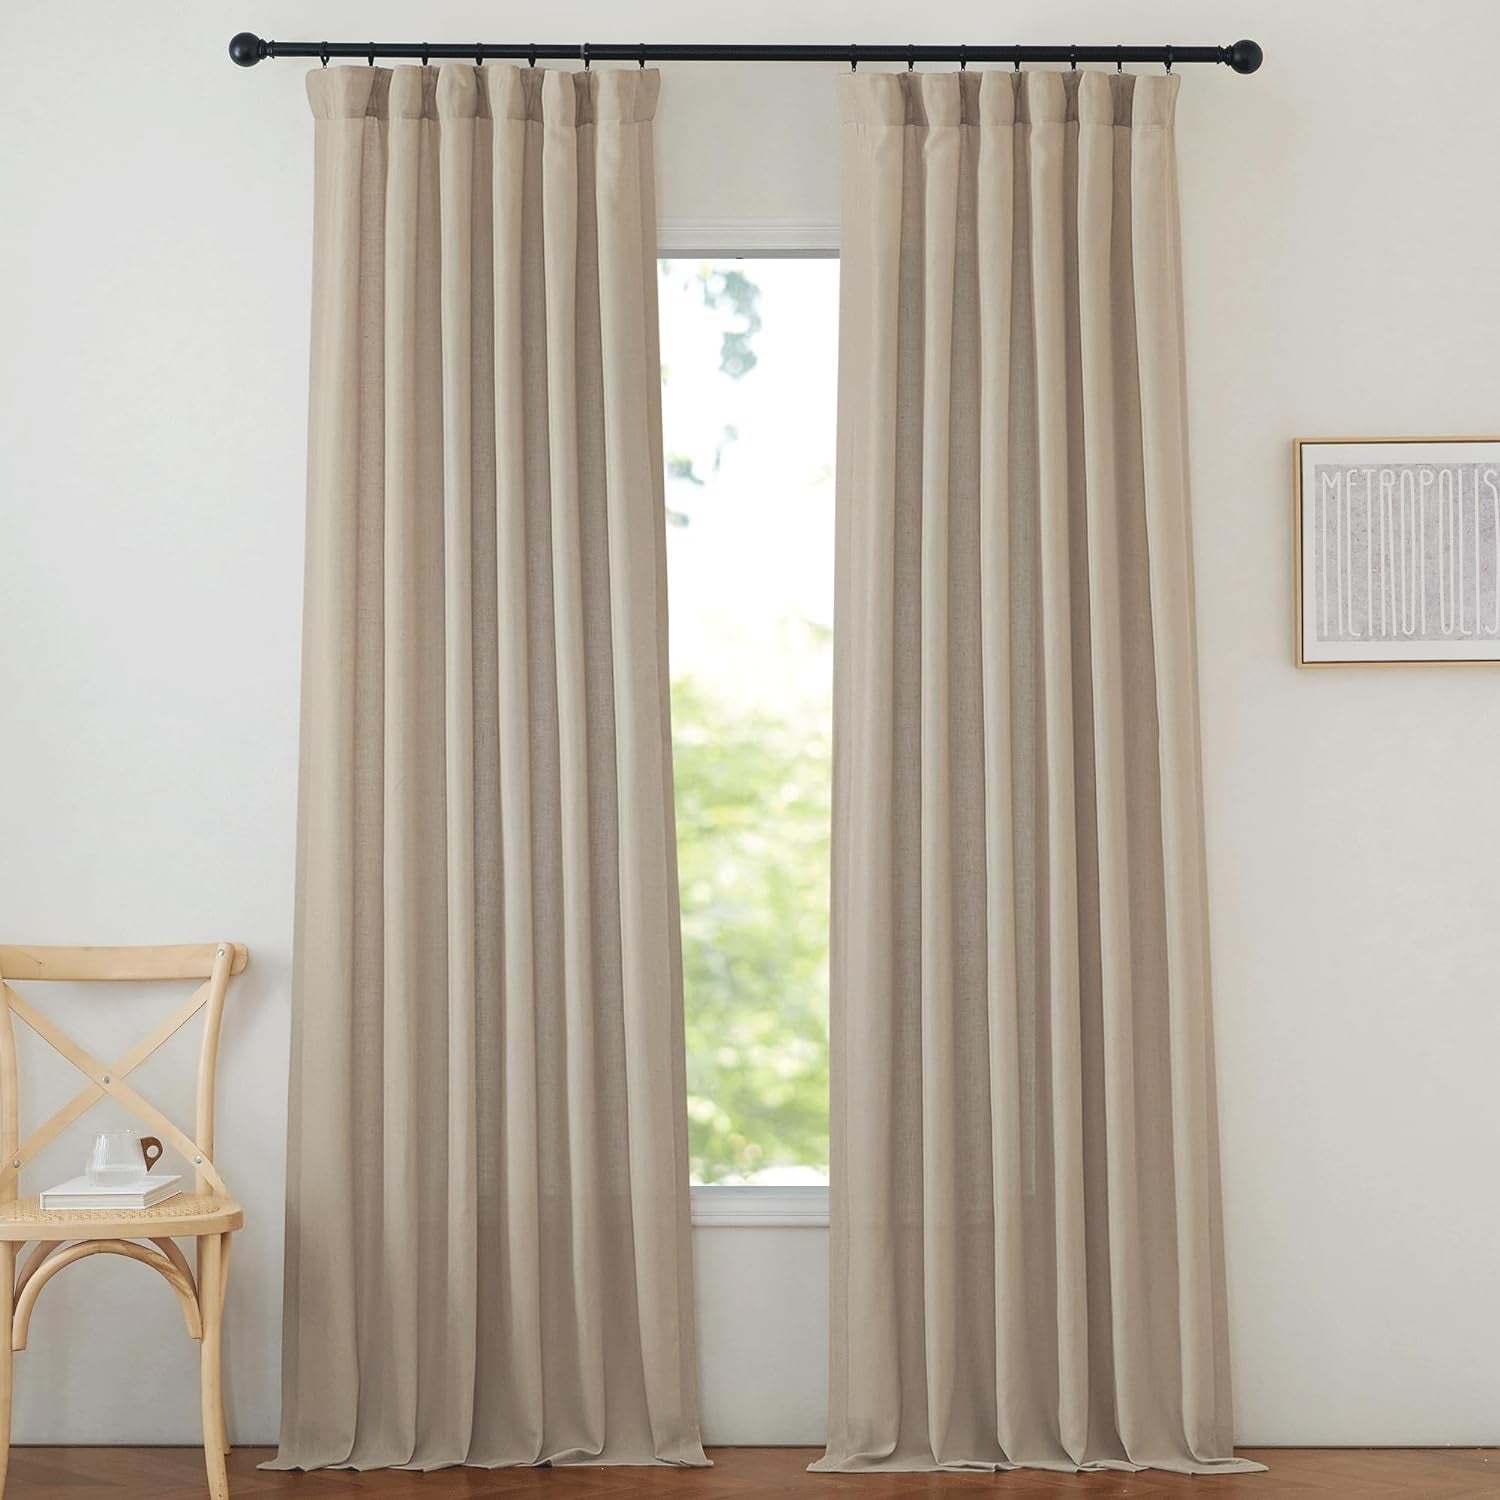 NICETOWN Taupe Thick Linen Curtains 96 Inches Long, Pinch Pleated Flax Linen Curtains Privacy Added Window Treatments with Light Filtering Drapes for Bedroom/Living Room, W50 X L96, 2 Panels  NICETOWN Camel W50 X L90 